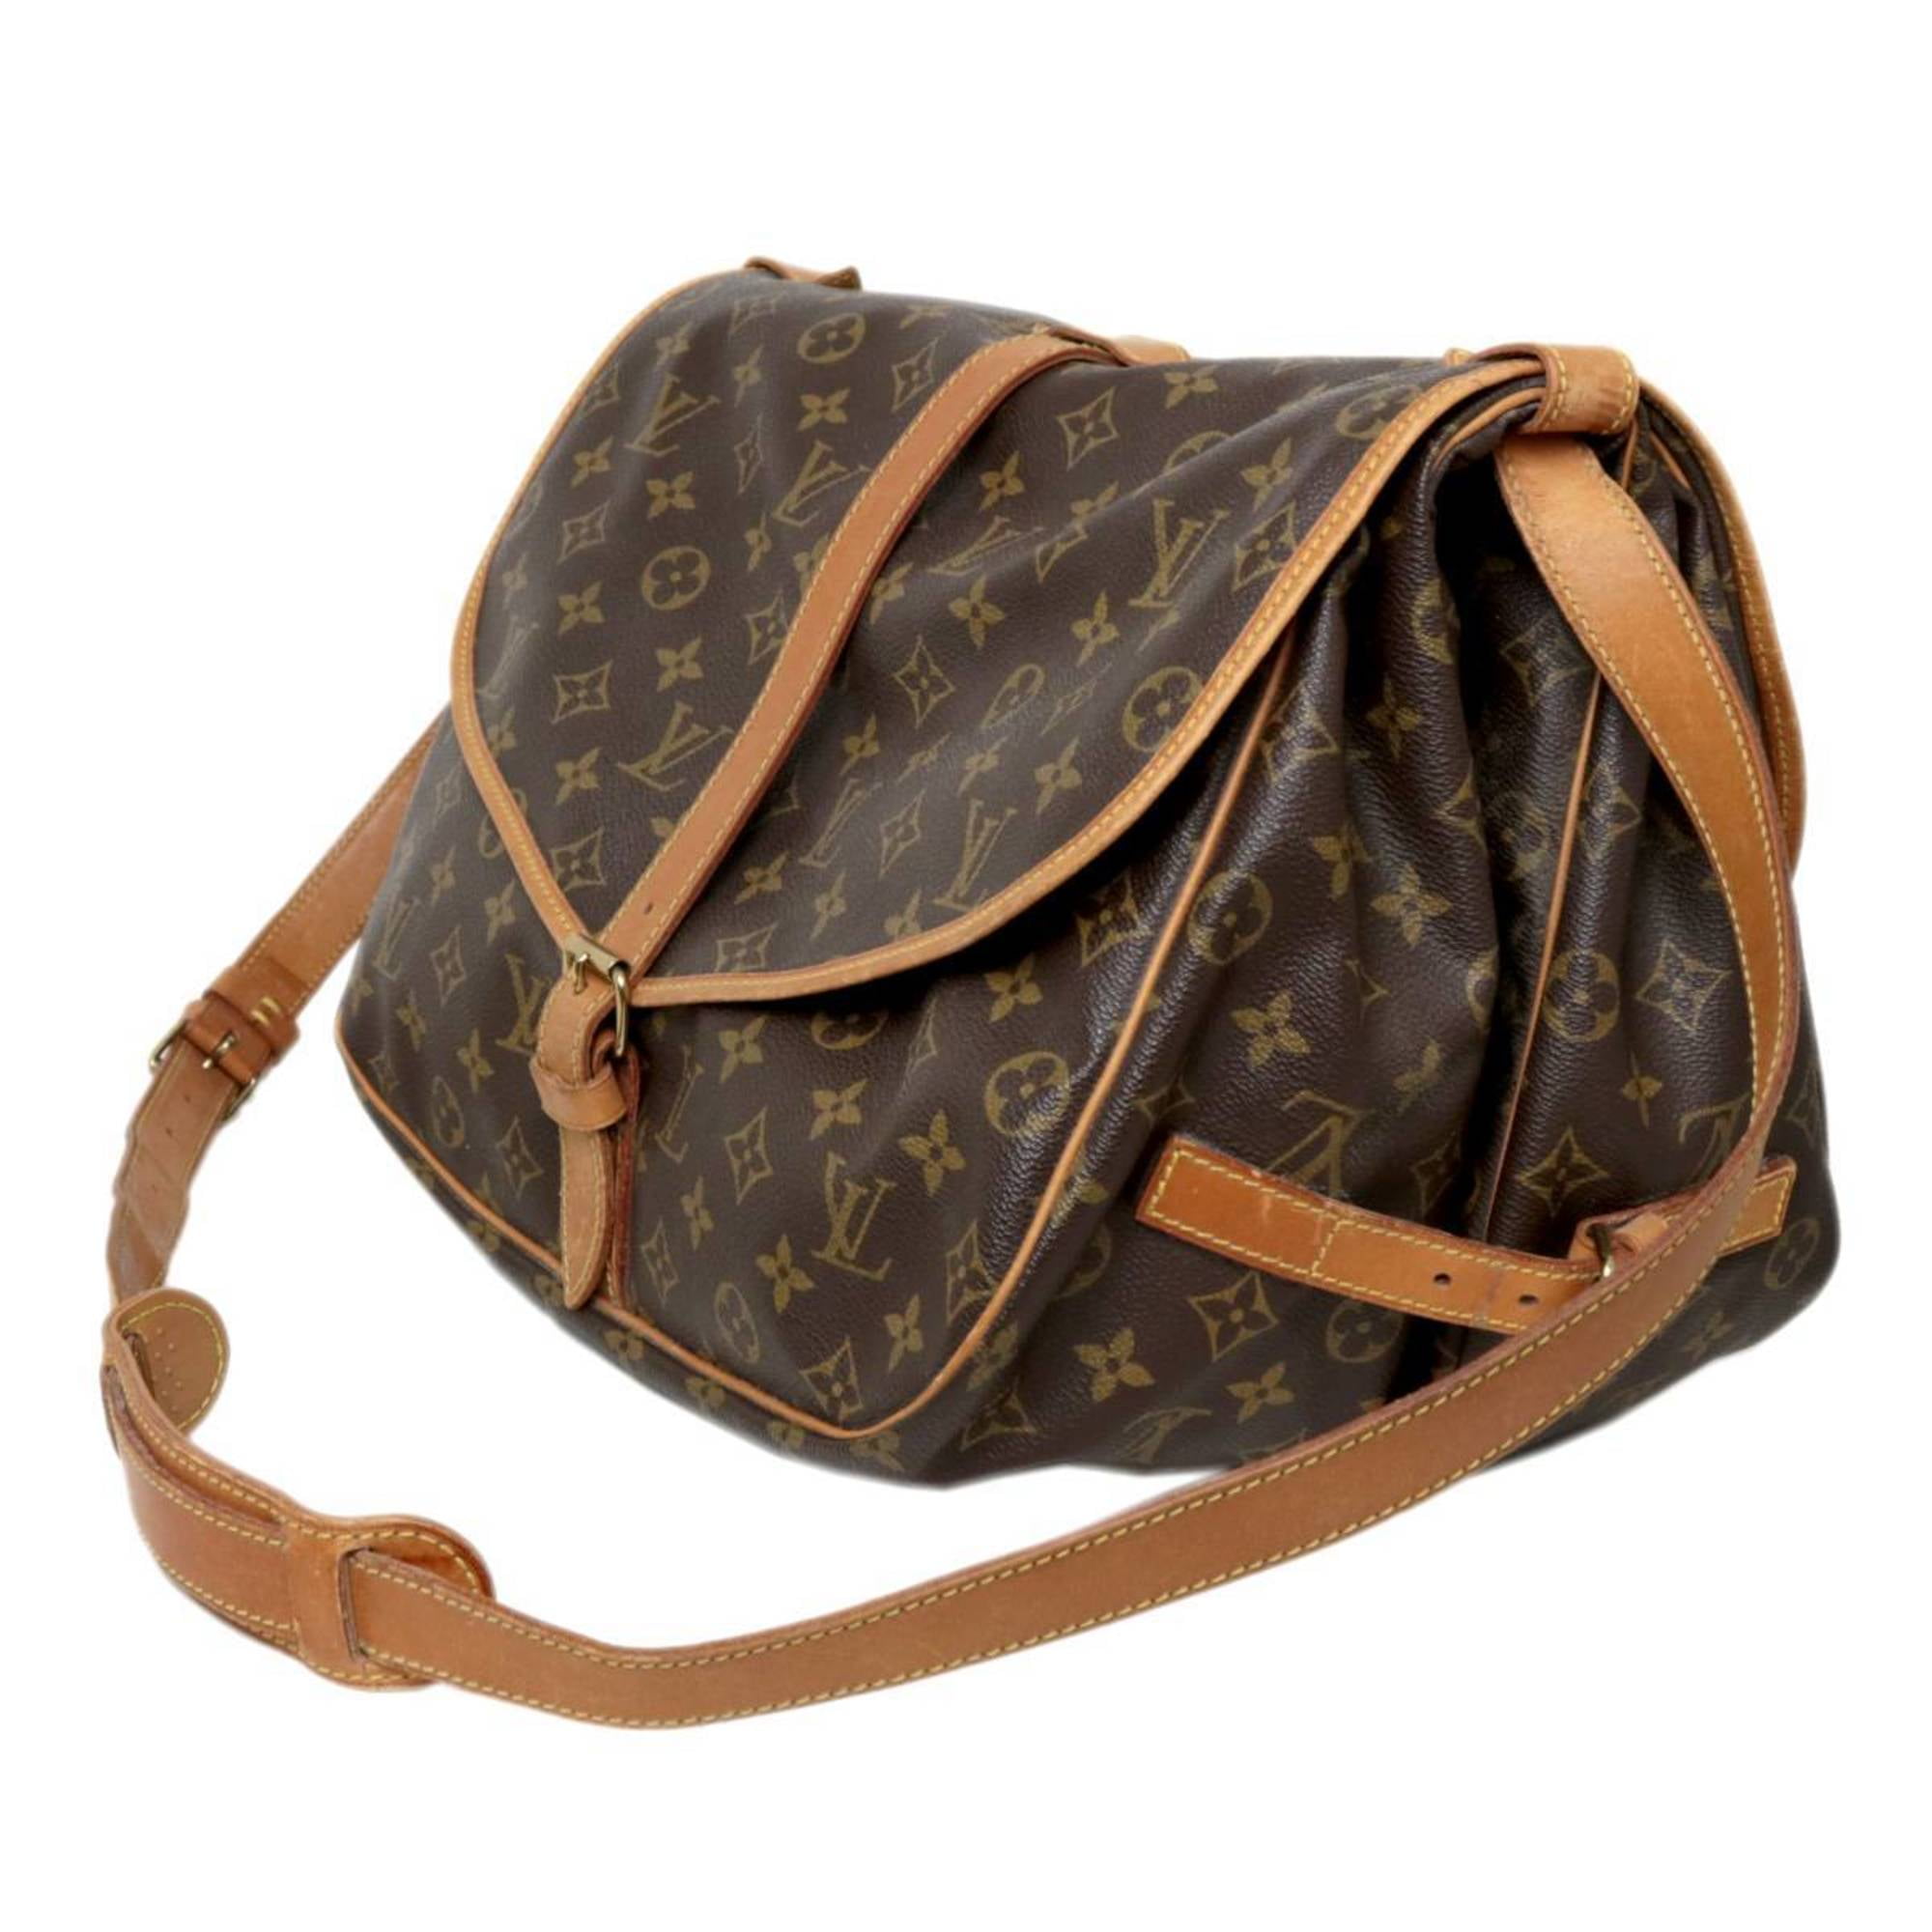 Buy Used LOUIS VUITTON Tote Bag Neverfull PM Pivoine Monogram Mini Pouch  Included M41245 from Japan  Buy authentic Plus exclusive items from Japan   ZenPlus